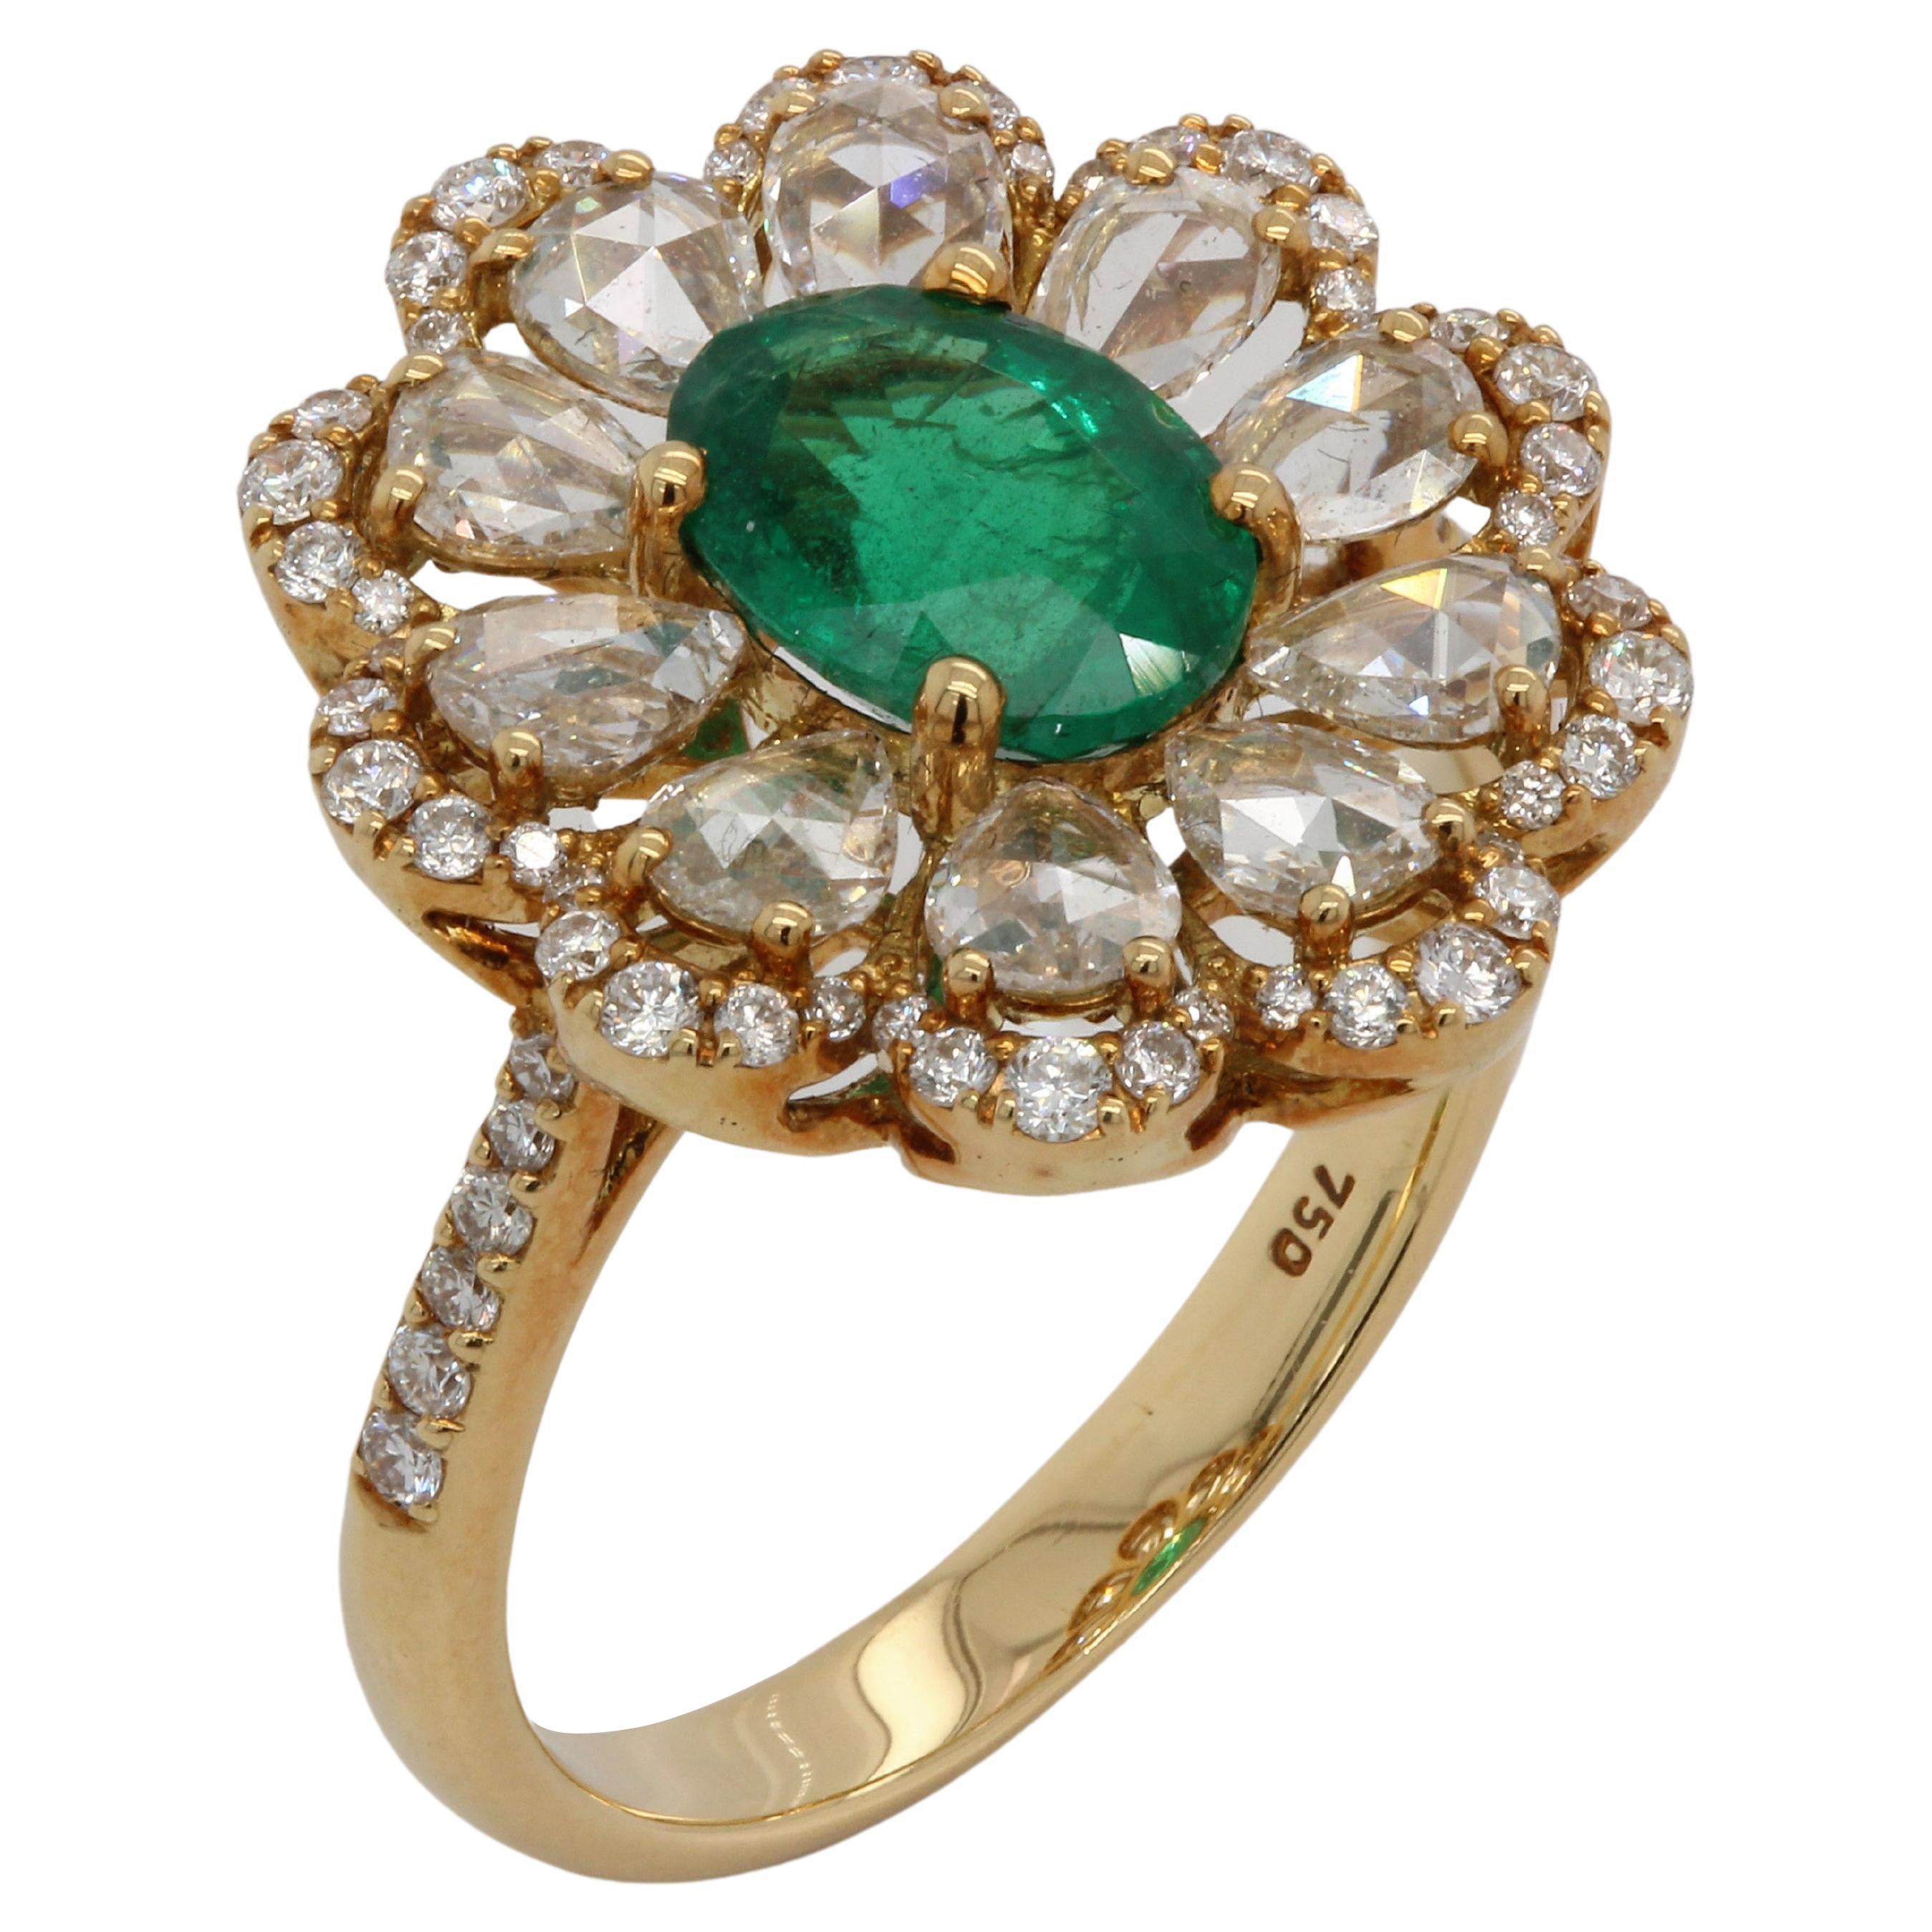 1.38 Carat Emerald and Diamond Ring in 18 Karat Gold For Sale